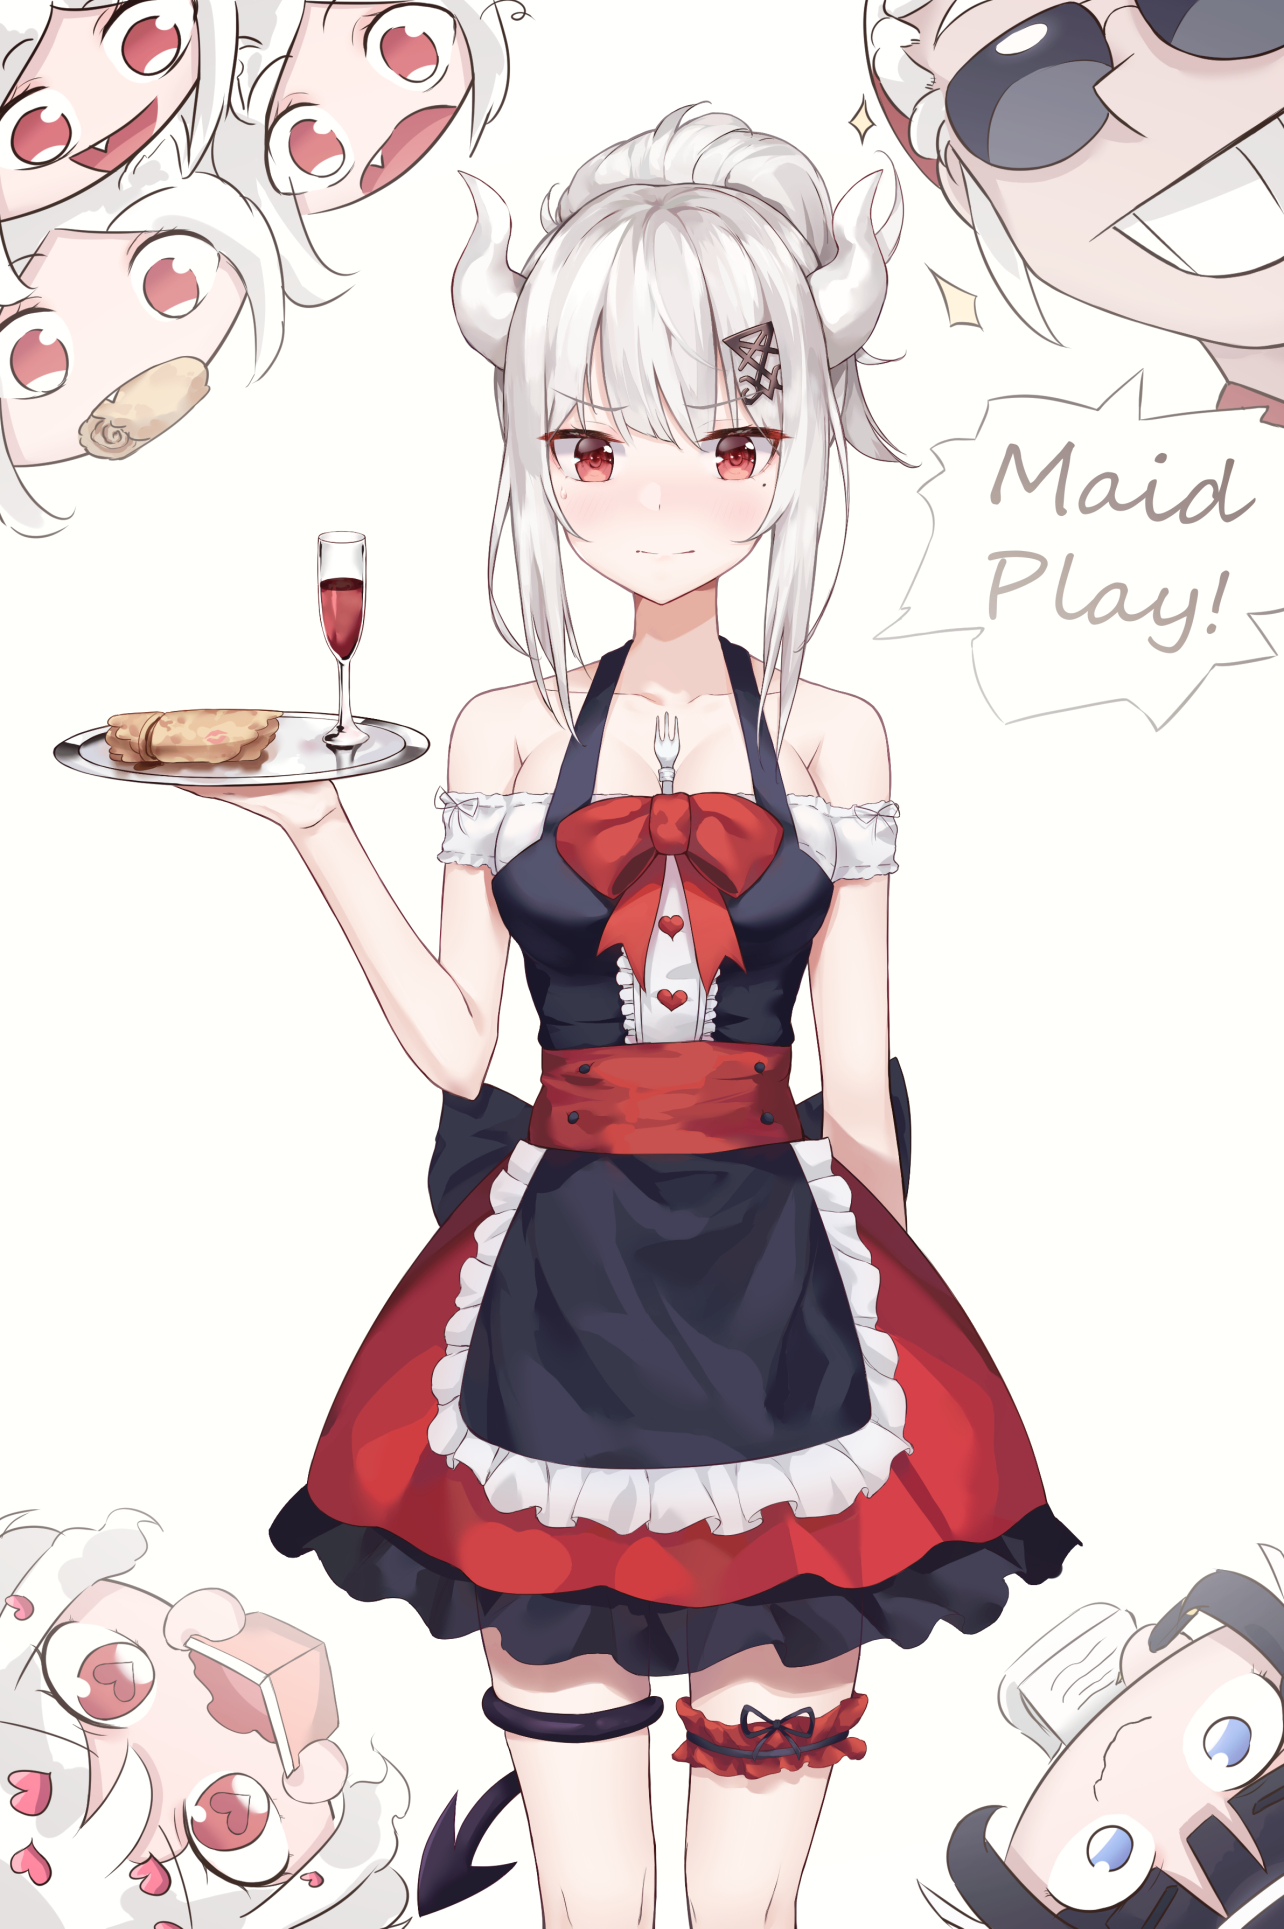 Maid roleplay Lucifer